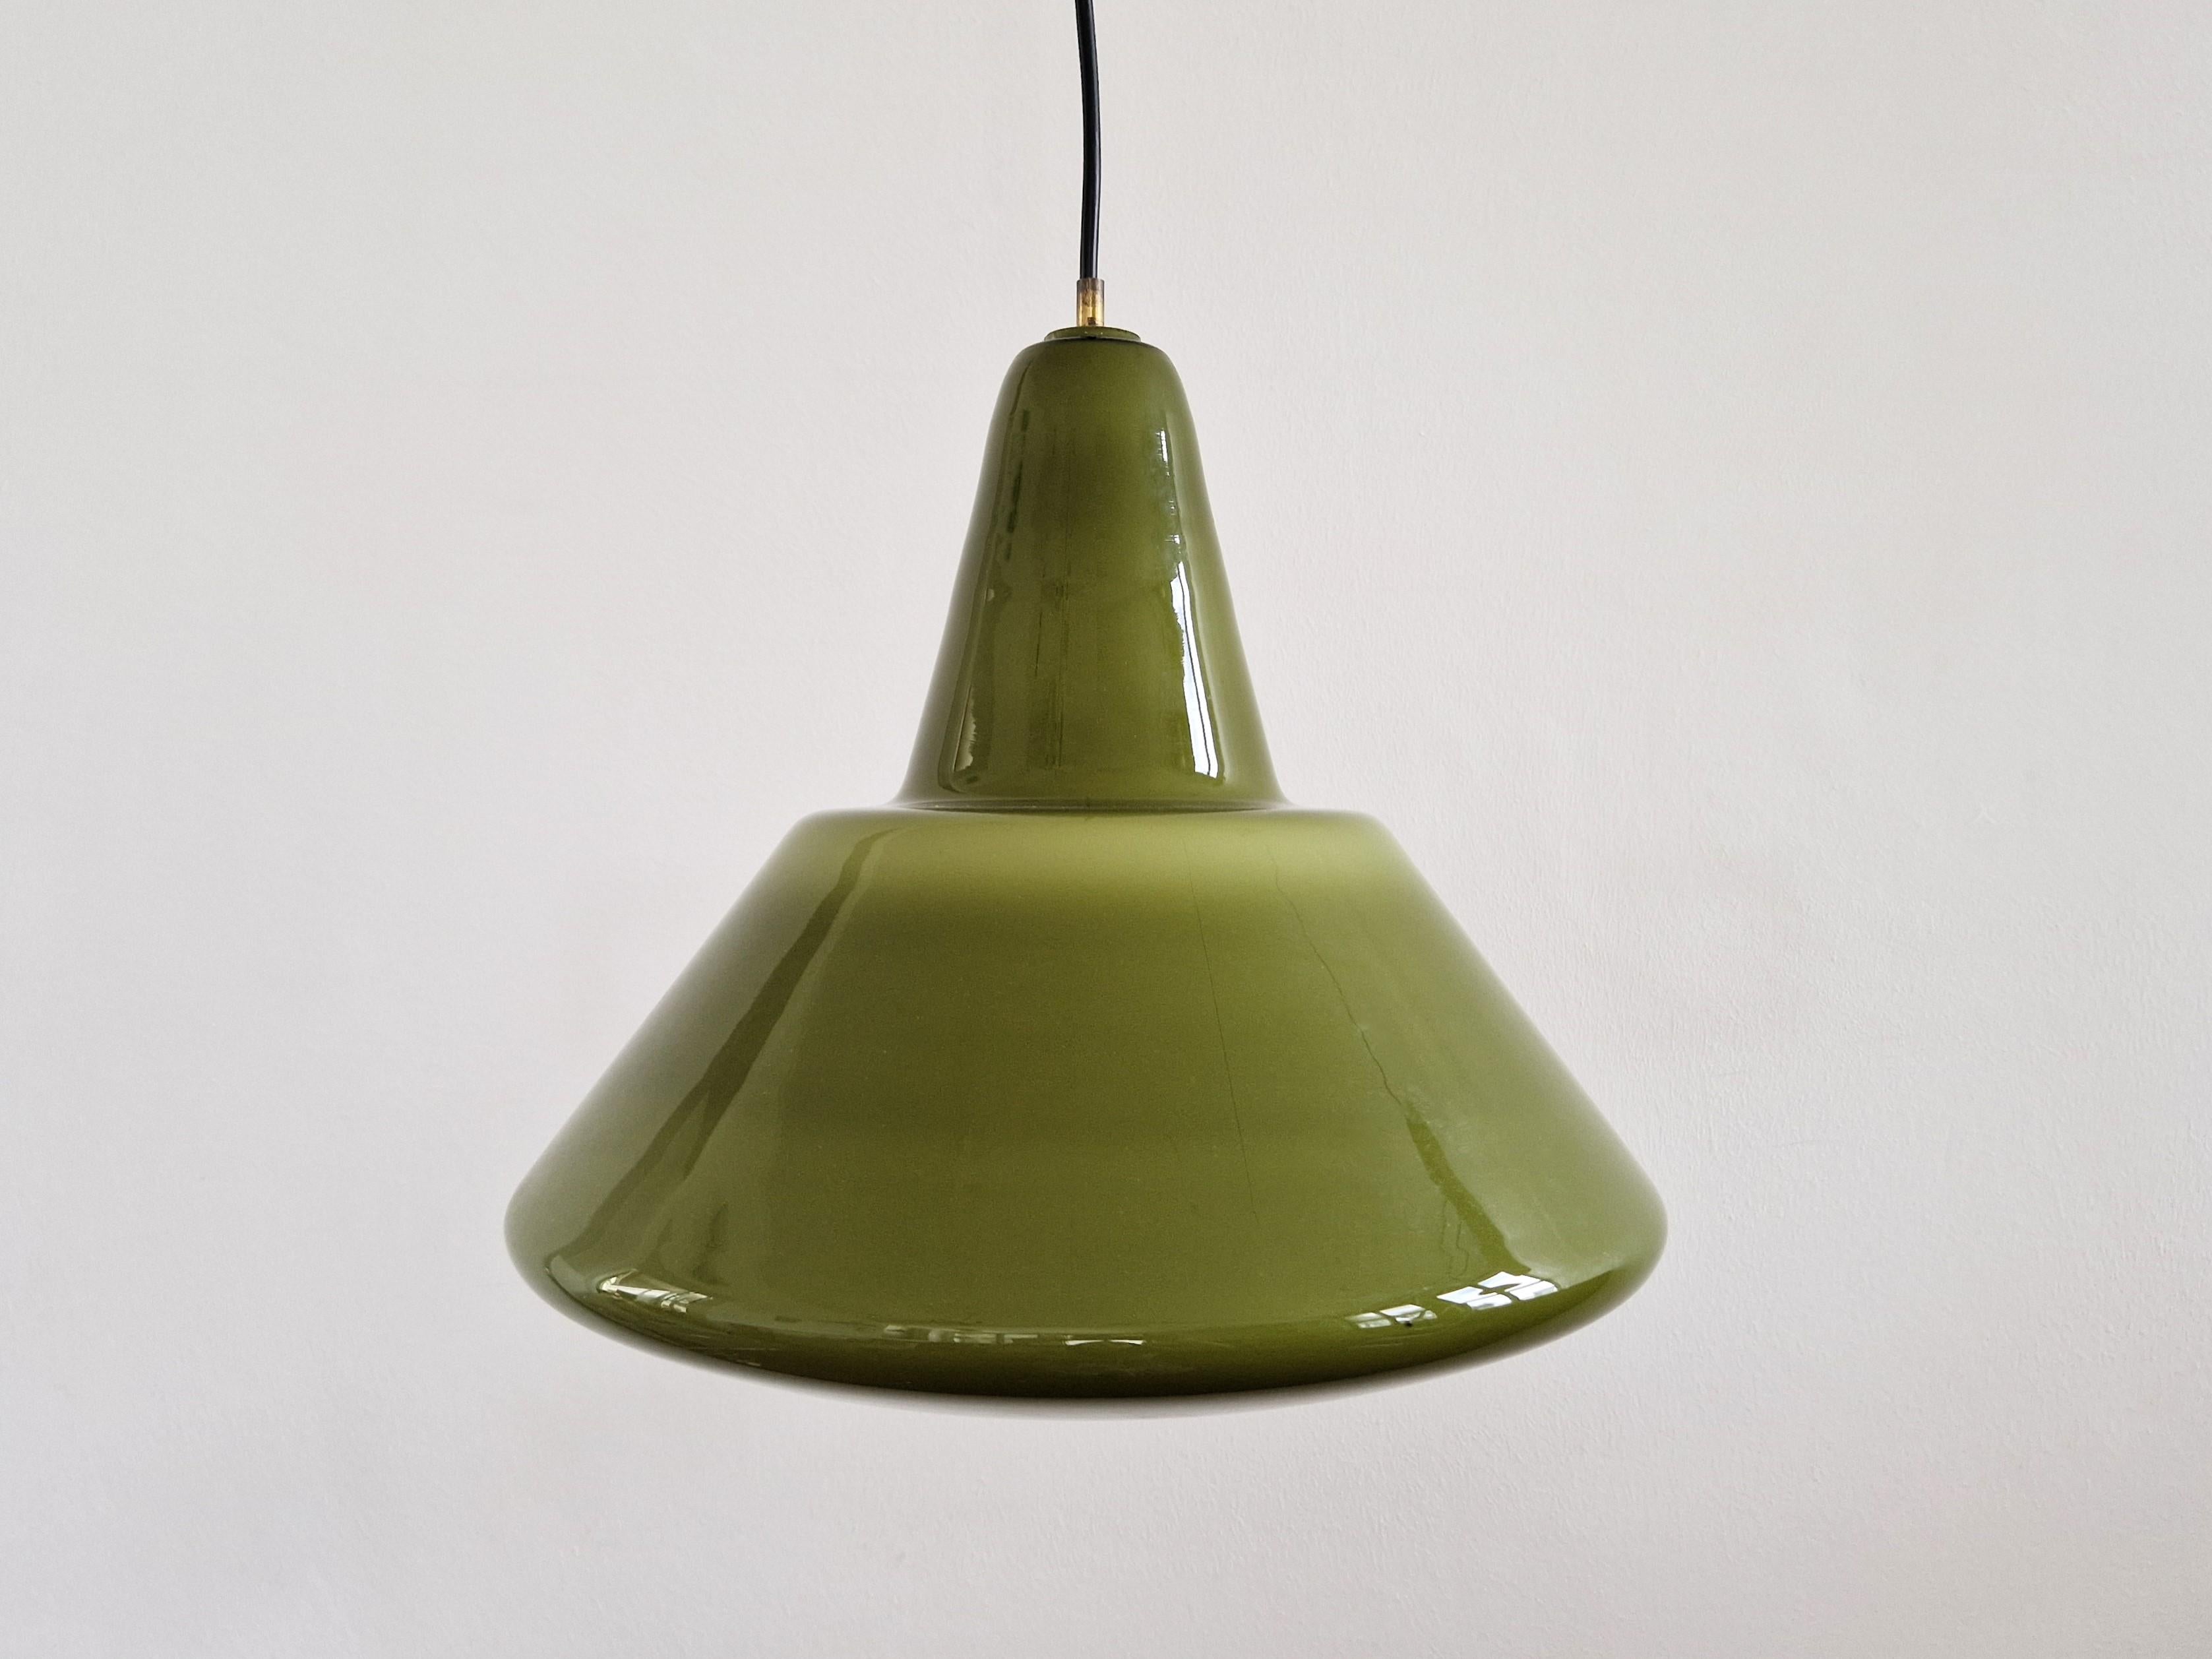 This stunning glass pendant lamp is a rare one we have not seen before. The combination of the elegant olive green colored glass and industrial shape makes it suitable in a variety of interiors. The lamp has a white glass inside and when lit it